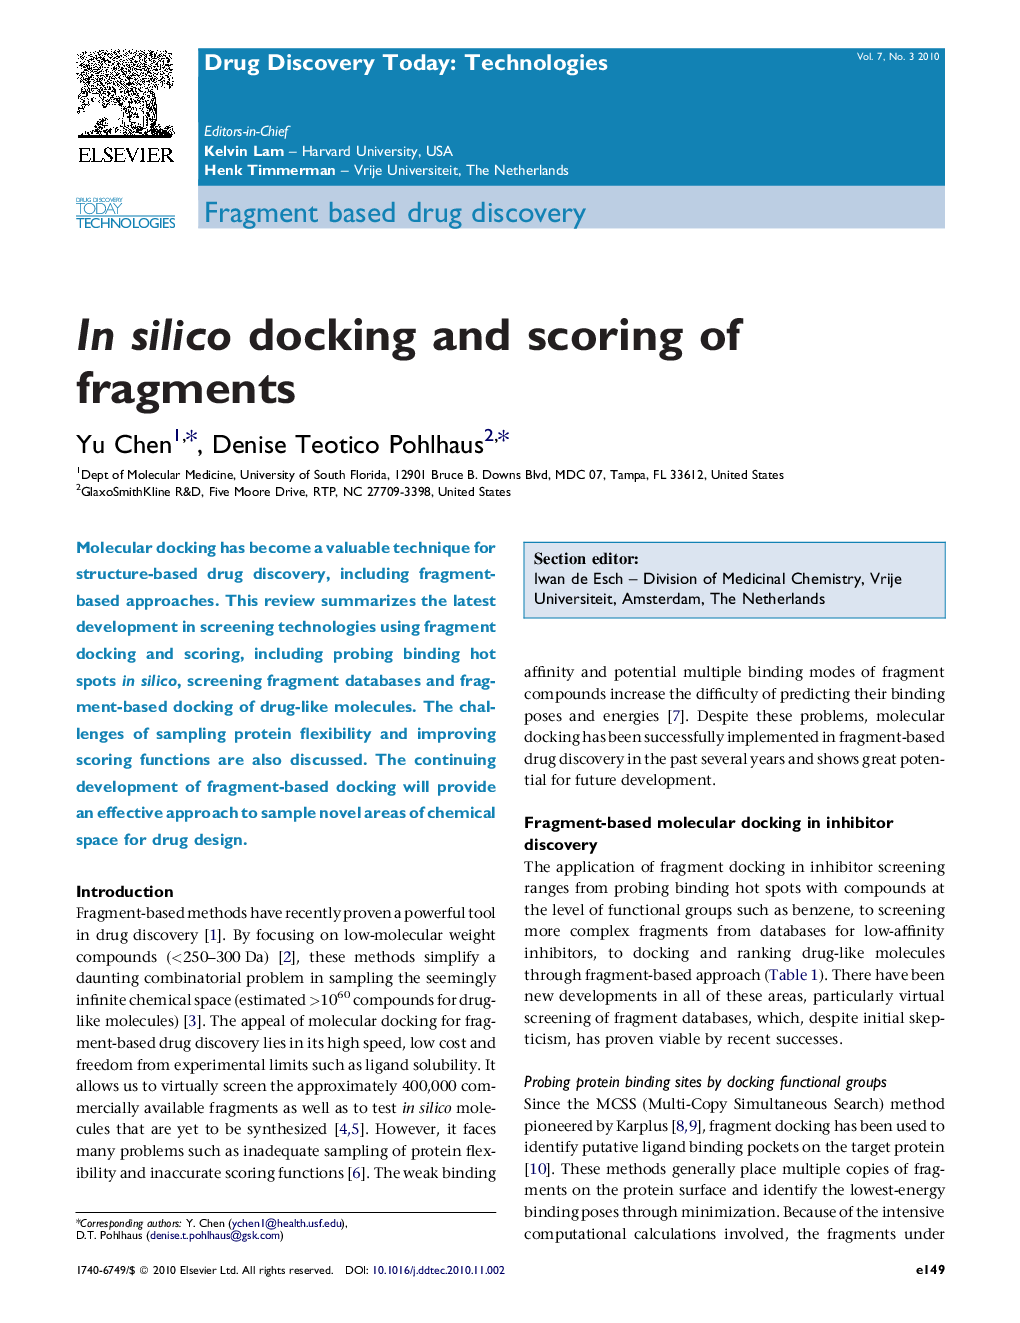 In silico docking and scoring of fragments